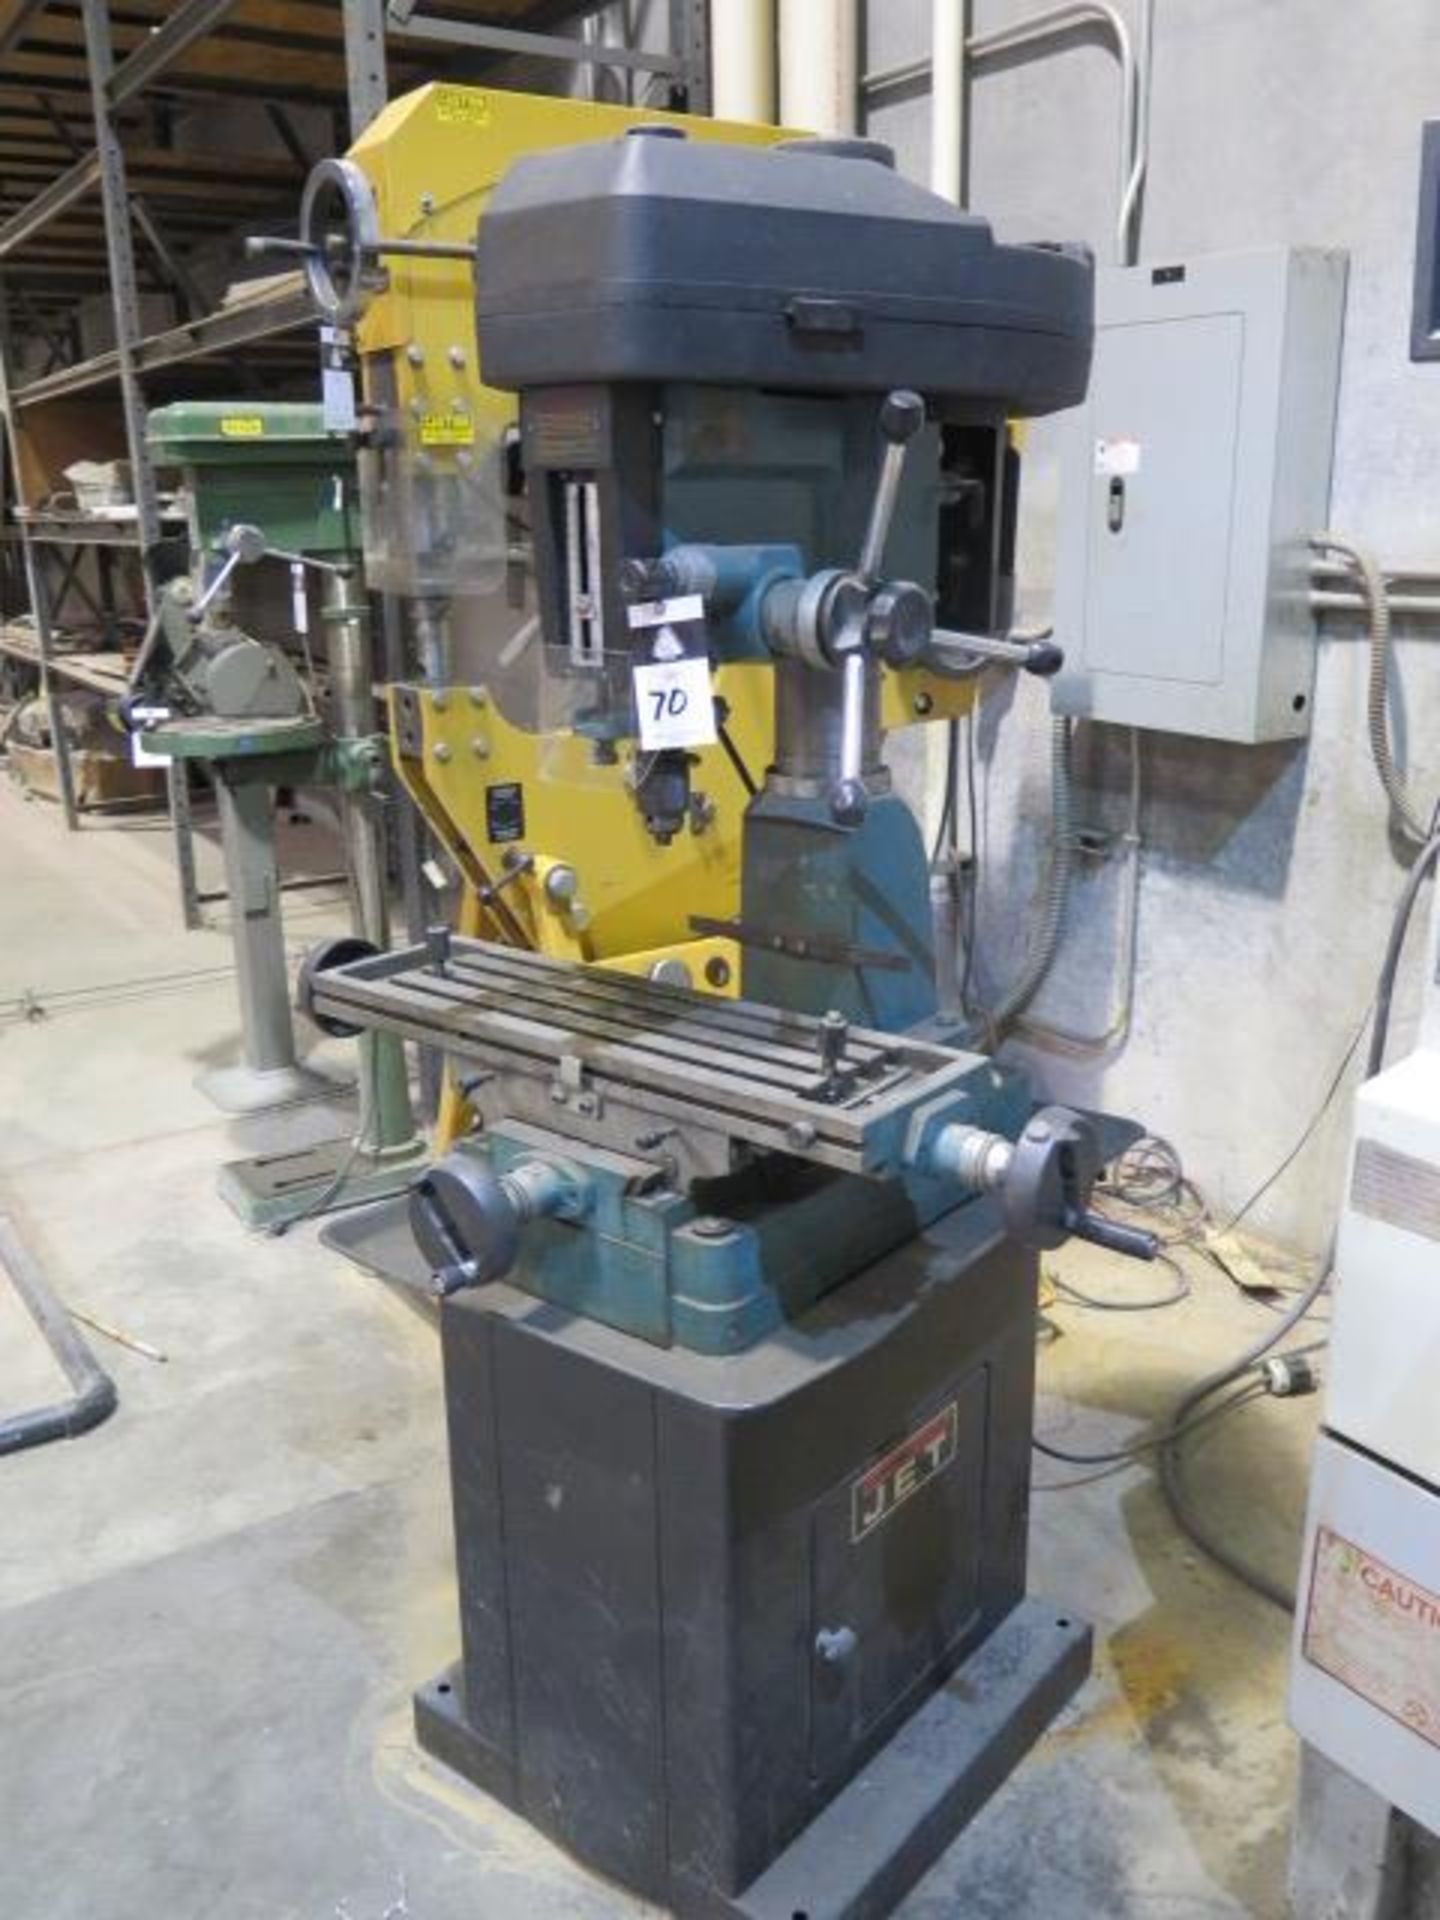 Jet Milling and Drilling Machine w/ 8 ¼”x 28 ½” Table (SOLD AS-IS - NO WARRANTY) - Image 3 of 8